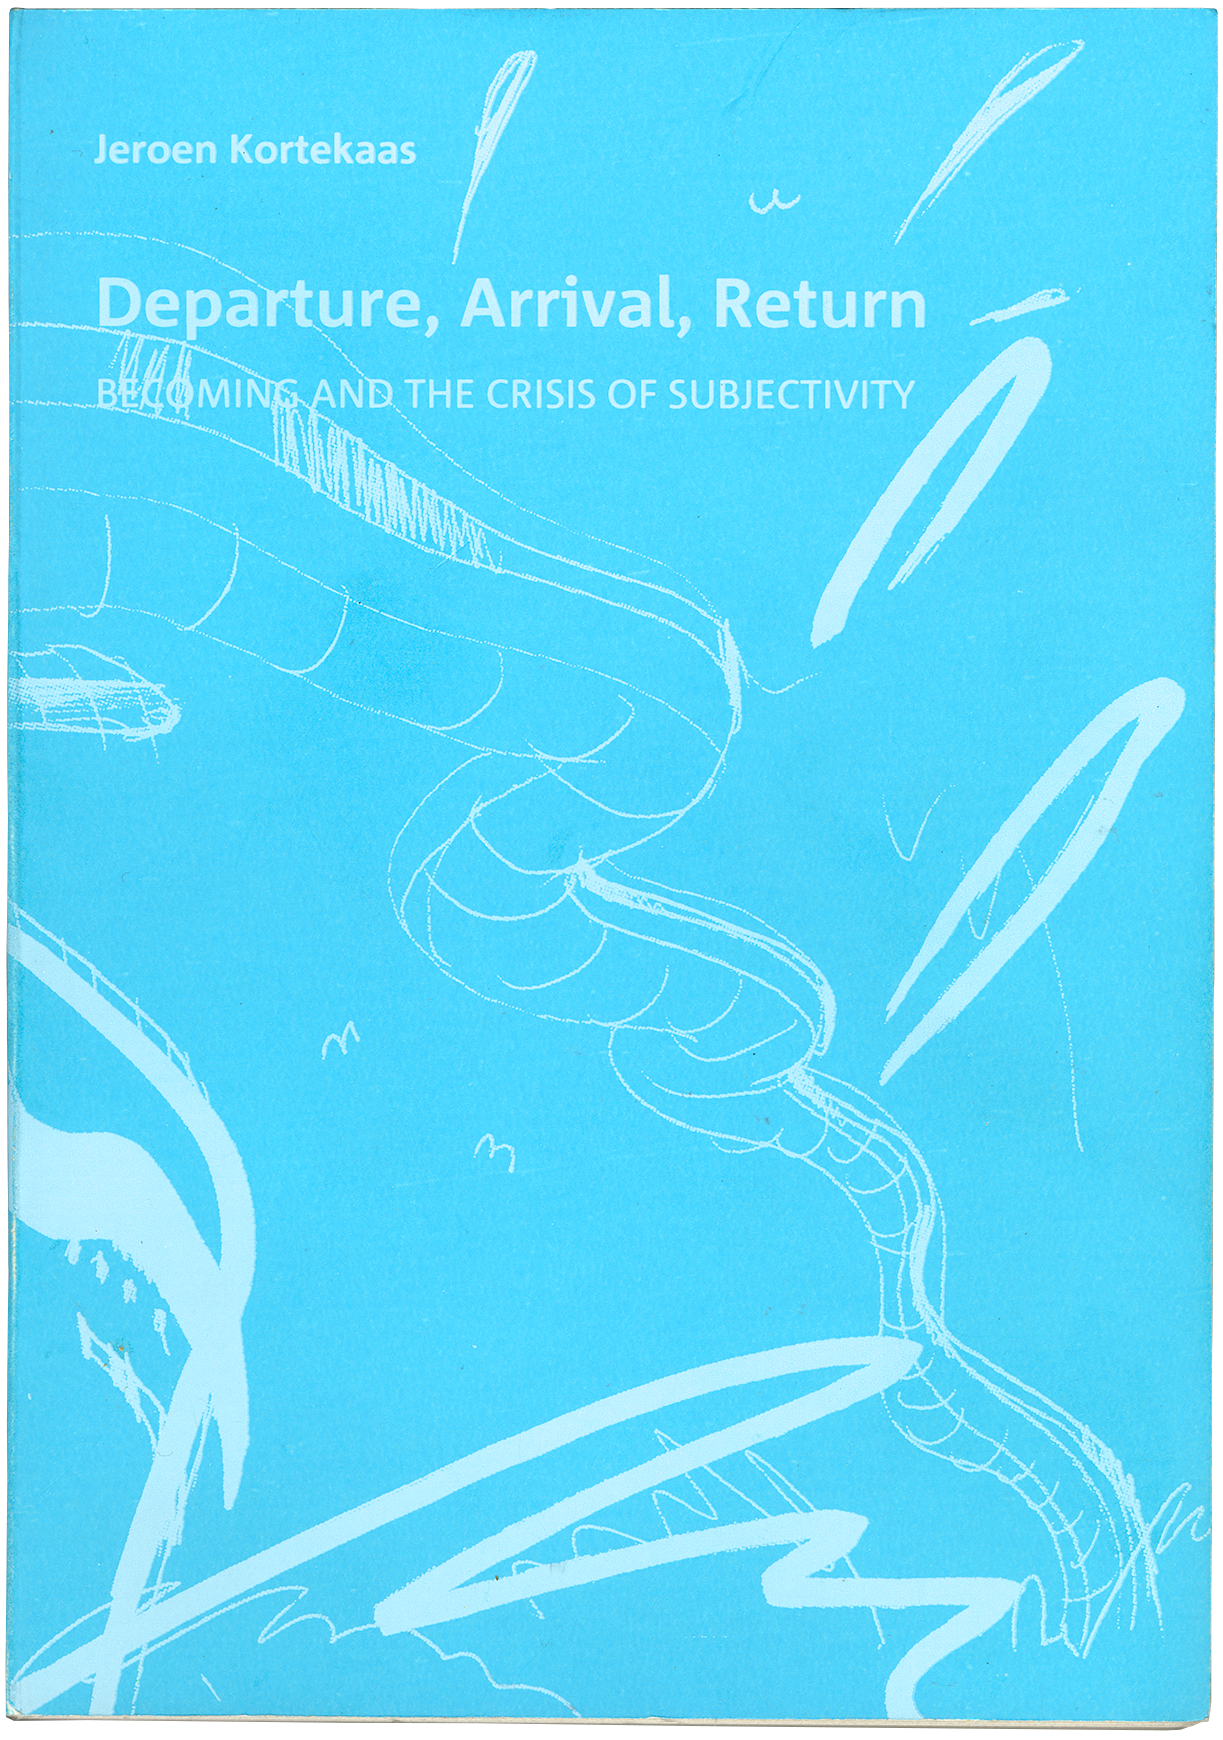 Cover of Departure Arrival Return: Becoming and the Crisis of Subjectivity by Jeroen Kortekaas